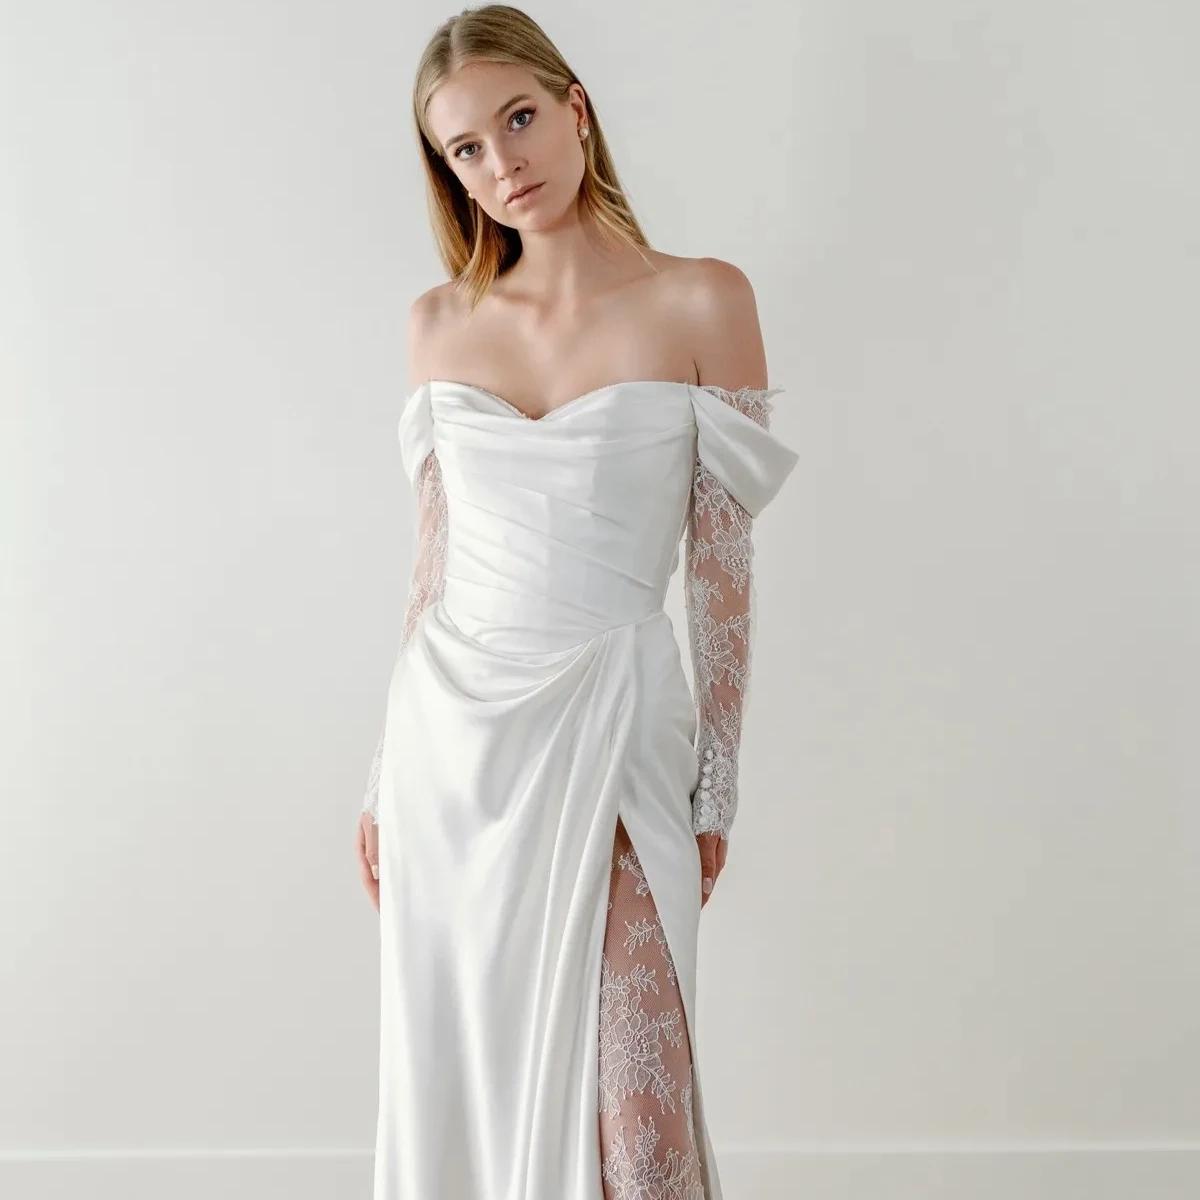 Photo of Model wearing a bridal gown by Willowby